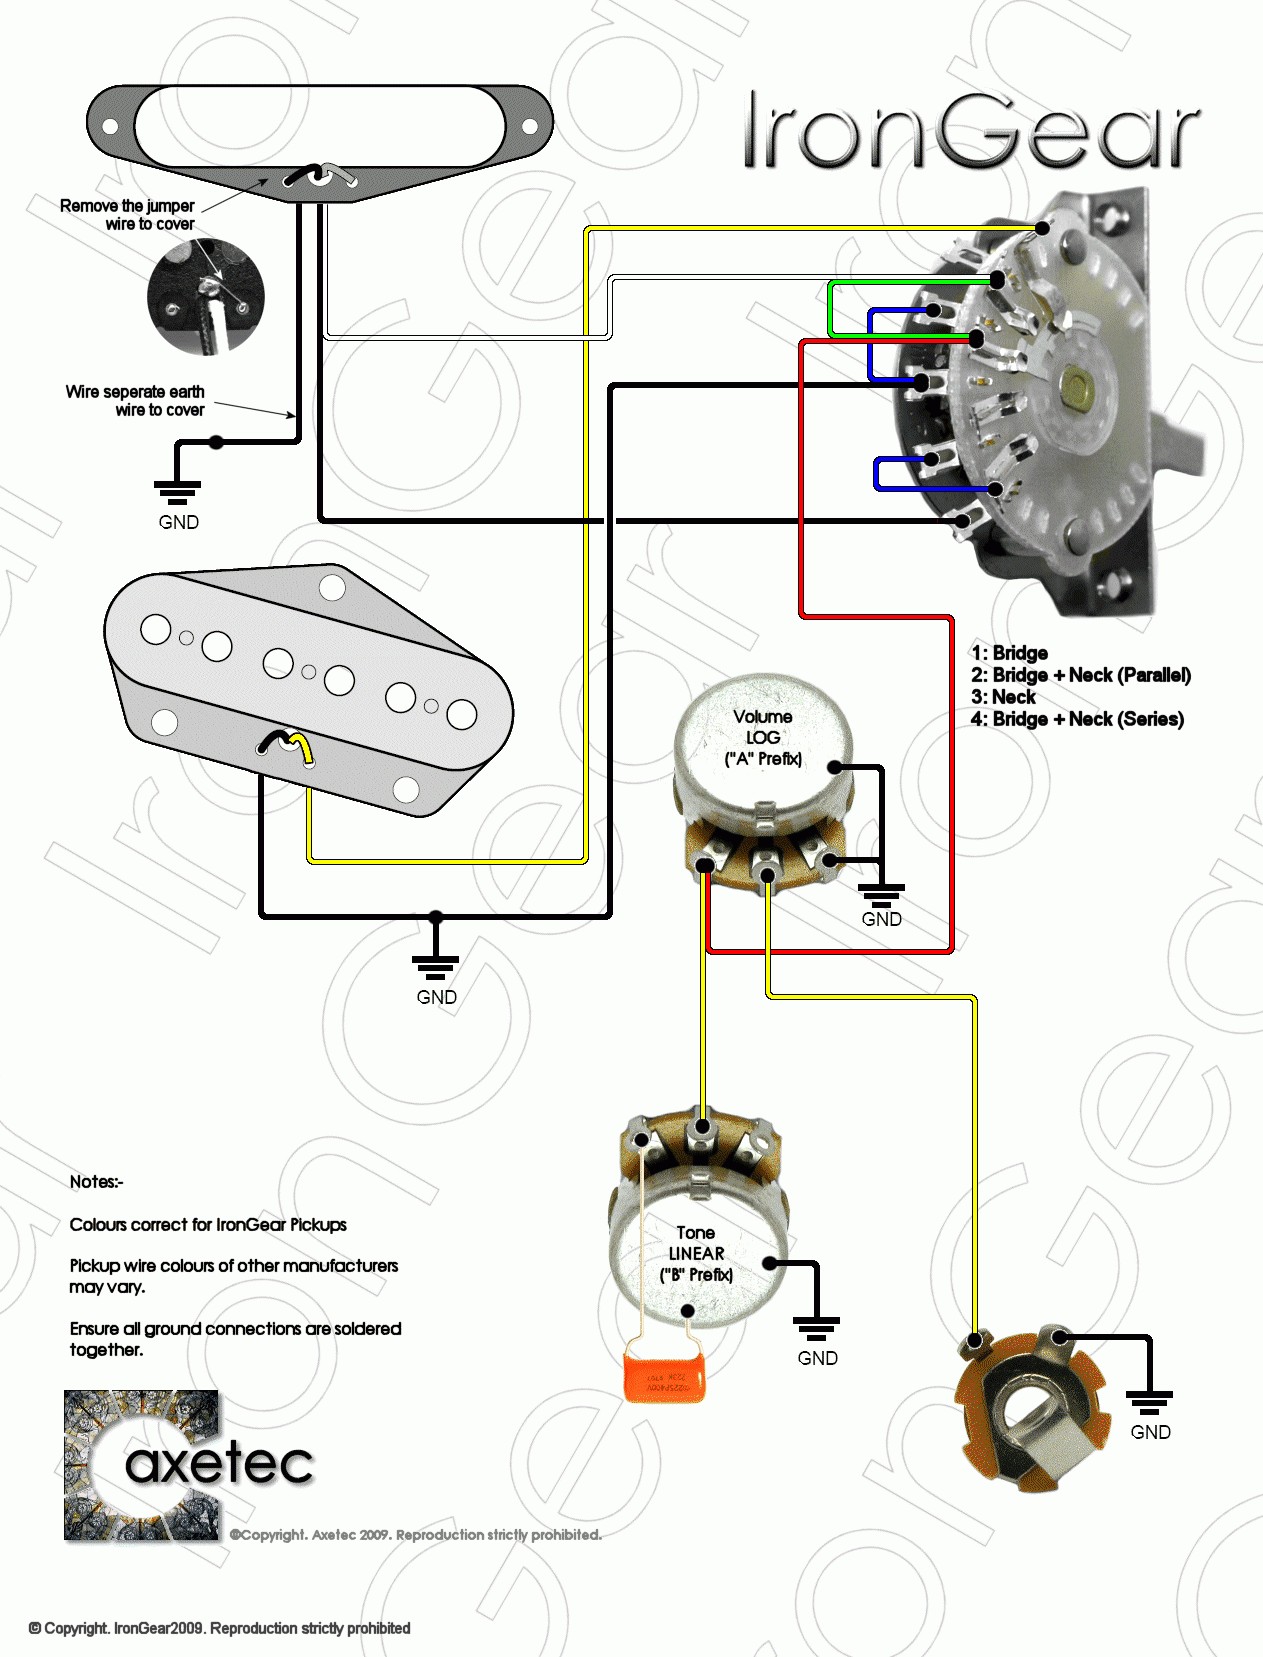 Wiring Diagram for 5 Way Guitar Switch Valid Wiring Diagram Fender 5 Way Switch Refrence Guitar